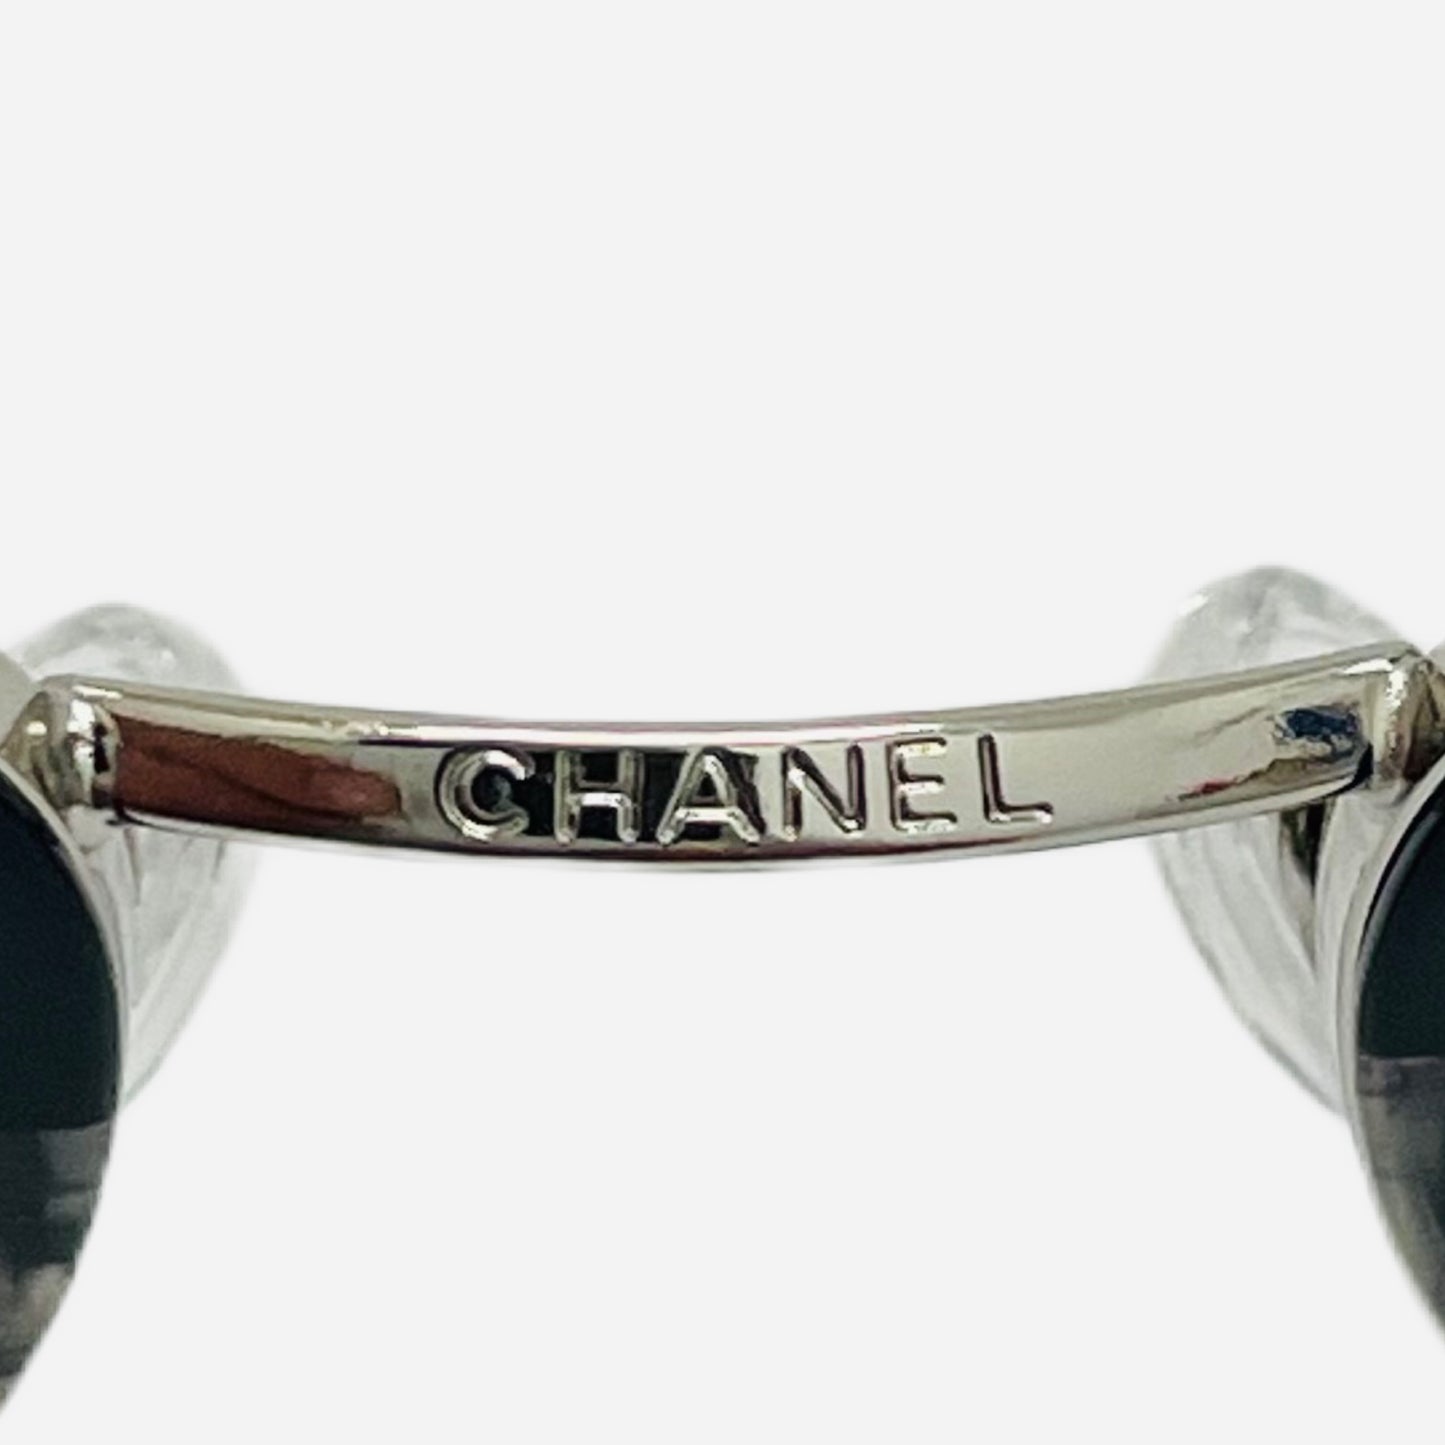 The-Seekers-Vintage-Coco-Chanel-Sunglasses-Sonnenbrille-Customized-2159-detail-chanel